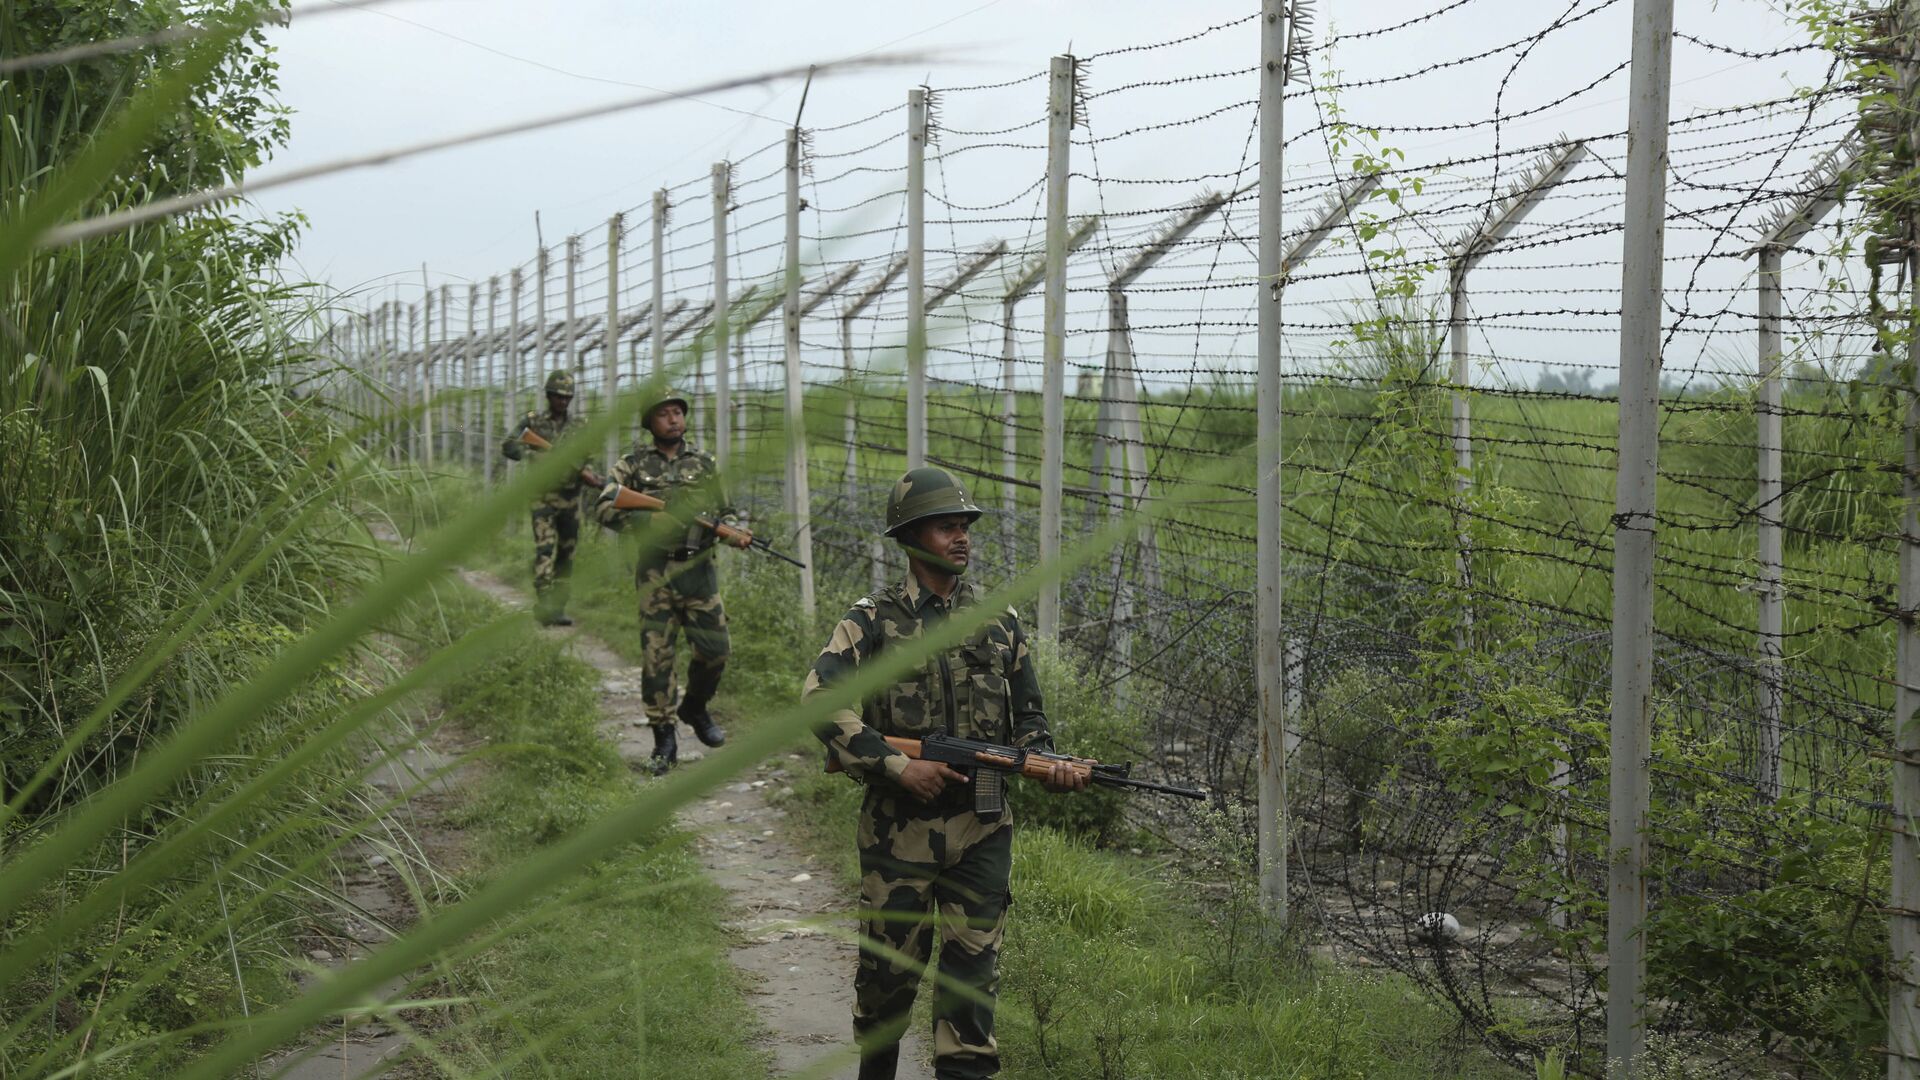 India's Border Security Force (BSF) soldiers patrol near the India Pakistan border fencing at Garkhal in Akhnoor, about 35 kilometers (22 miles) west of Jammu, India, Tuesday, Aug.13, 2019 - Sputnik International, 1920, 01.01.2022